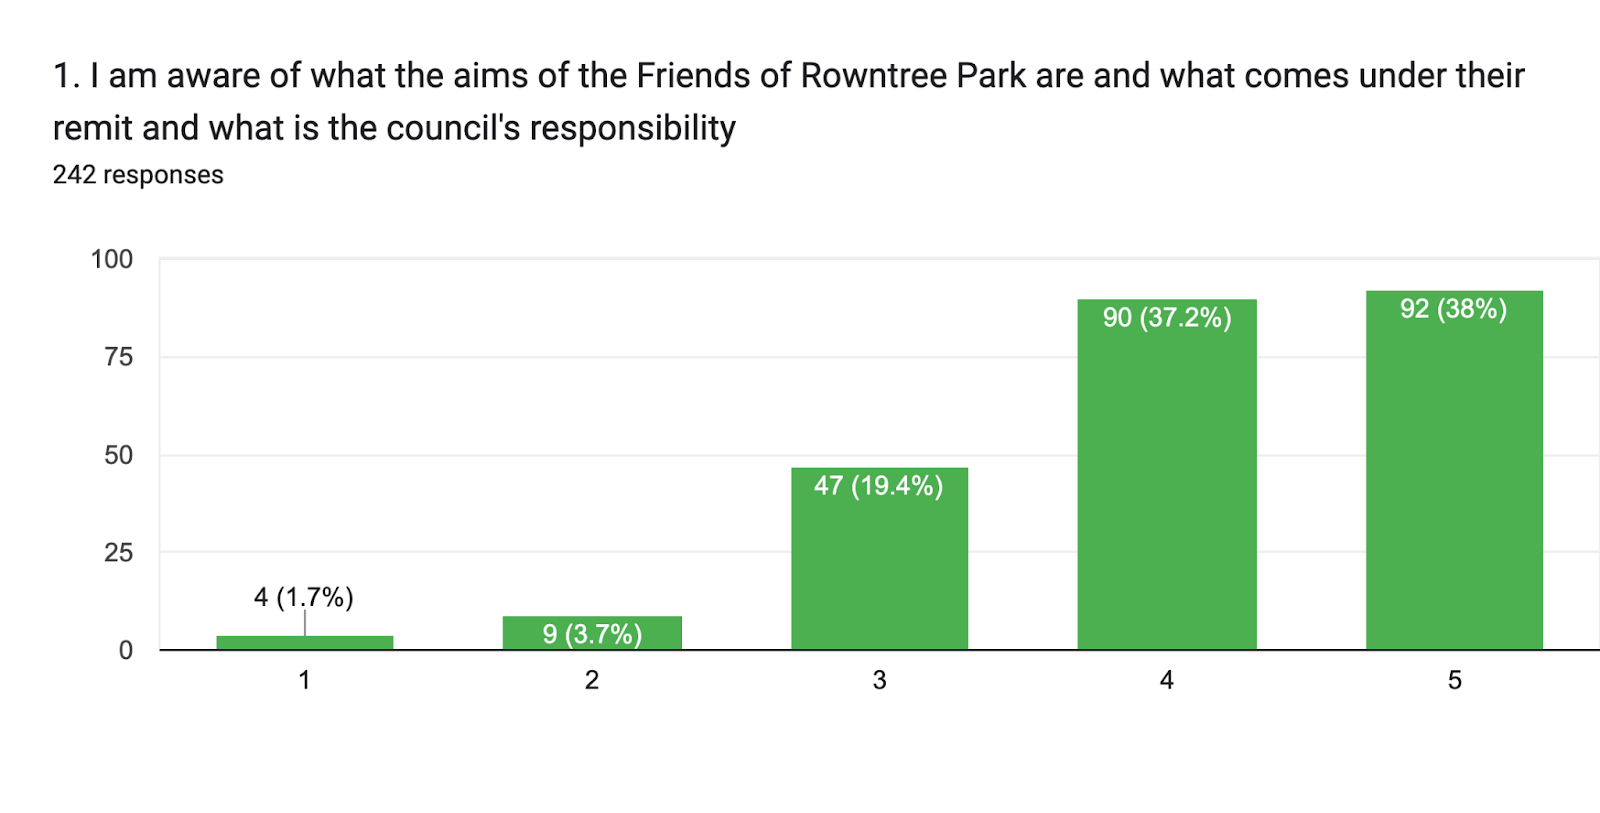 Forms response chart. Question title: 1. I am aware of what the aims of the Friends of Rowntree Park are and what comes under their remit and what is the council's responsibility. Number of responses: 242 responses.